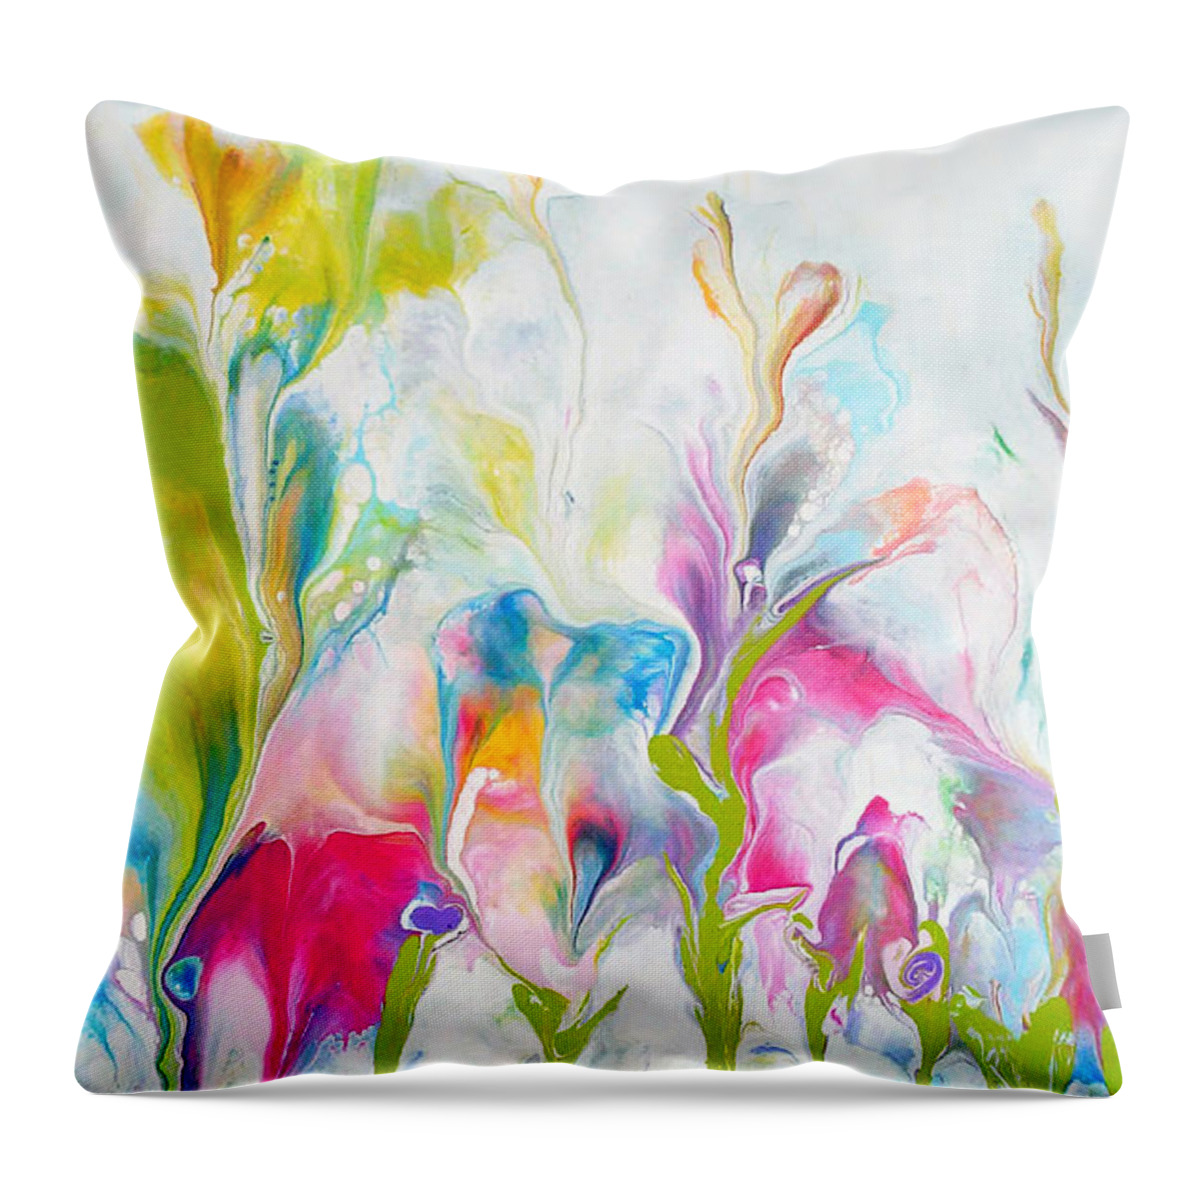 Rainbow Colors Abstract Nature Acrylic Throw Pillow featuring the painting Grass Dance by Deborah Erlandson